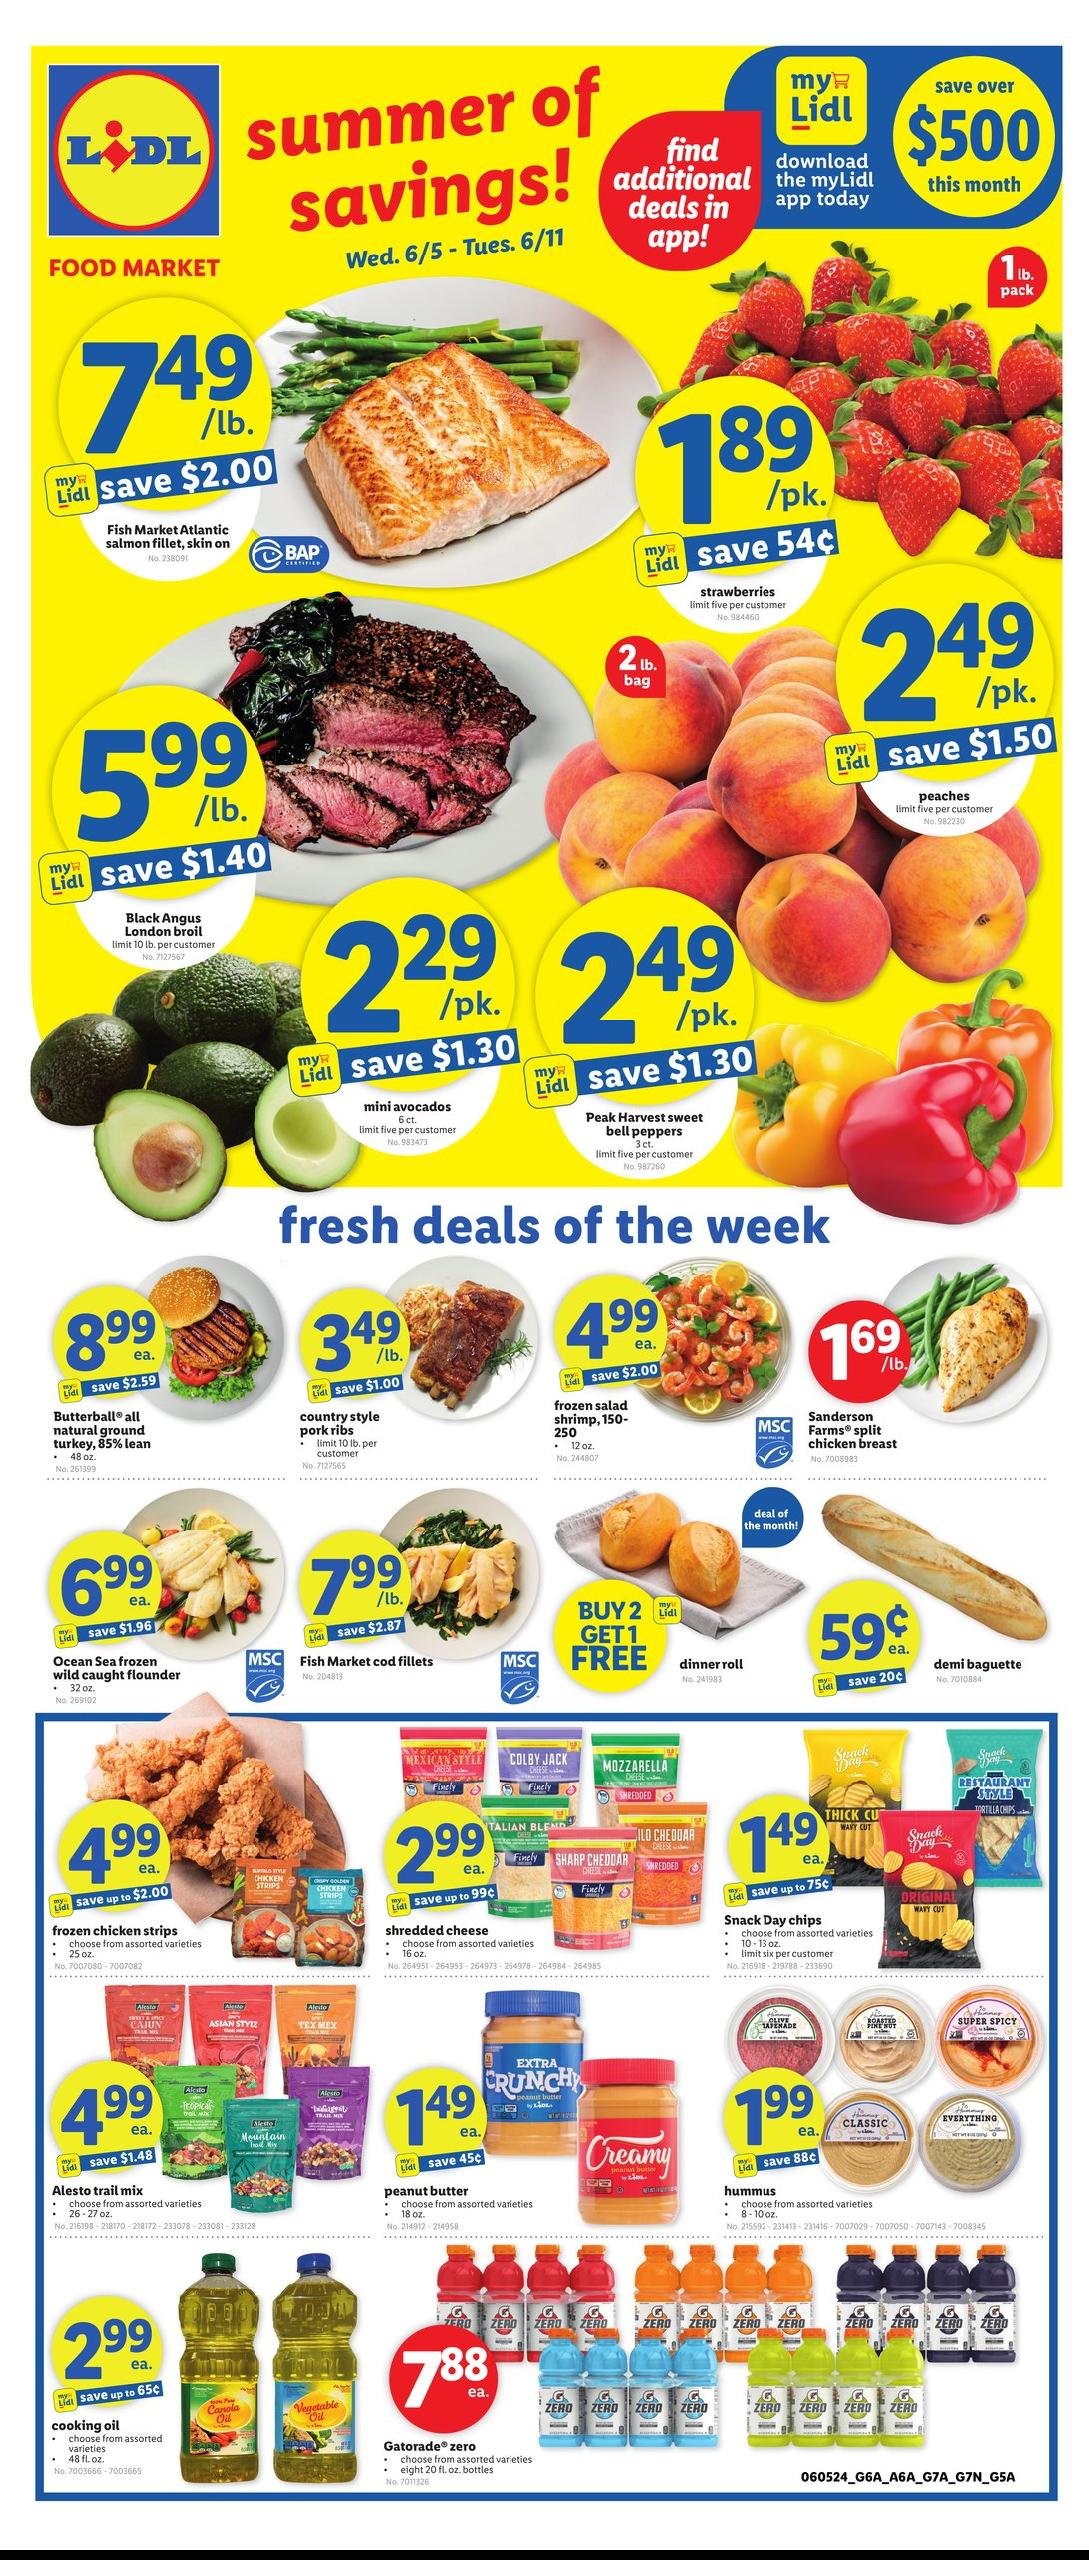 Lidl weekly ad - page 1